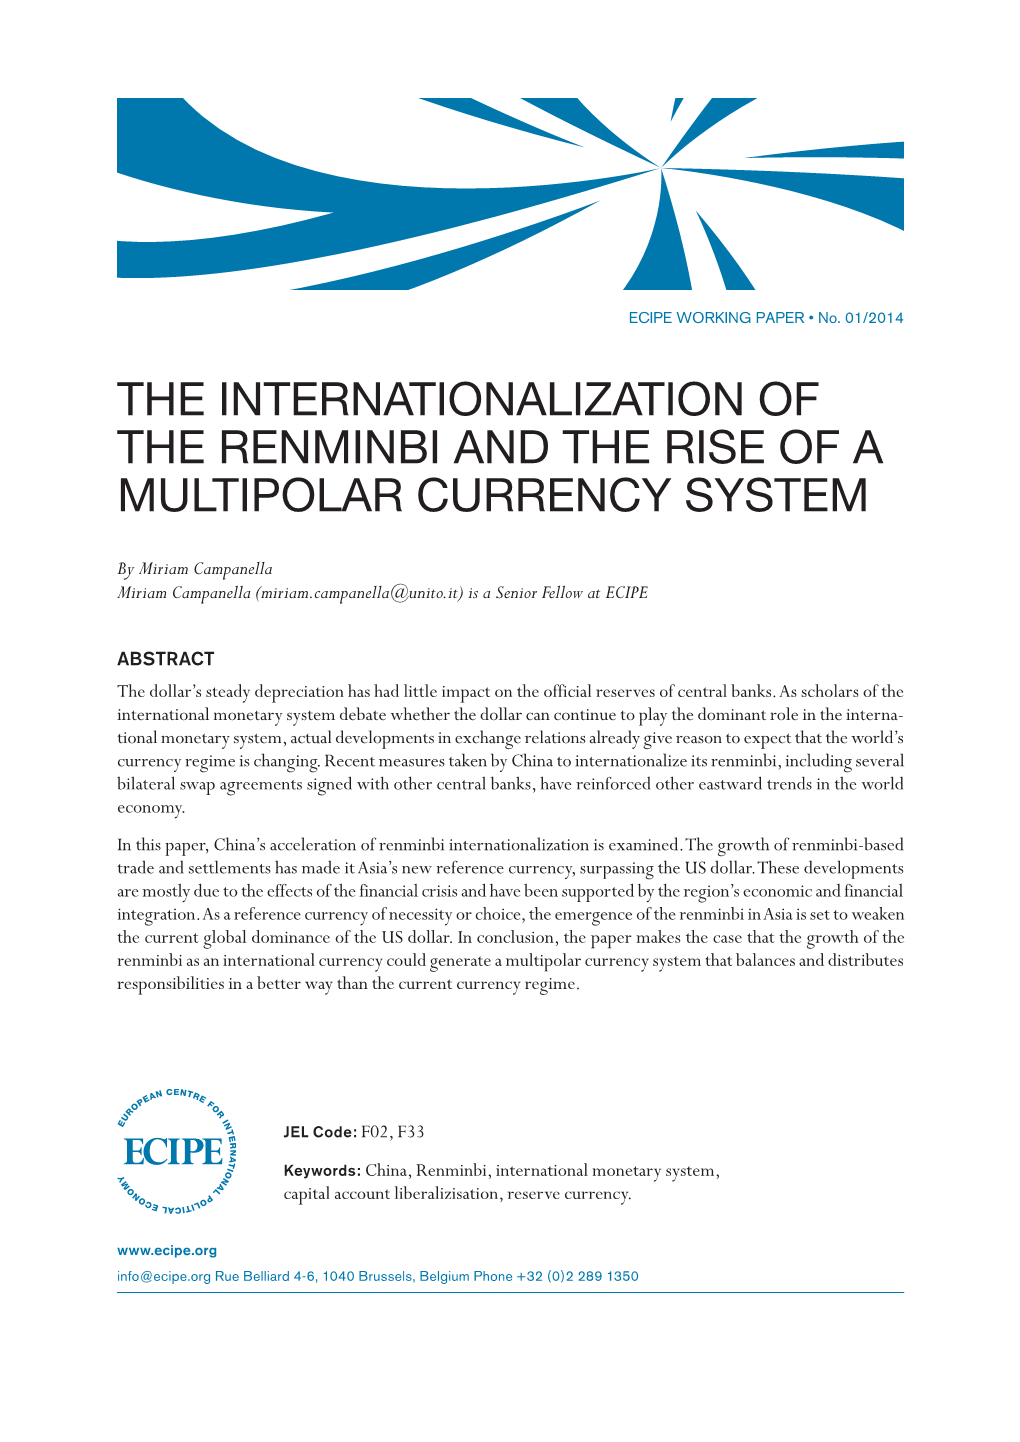 The Internationalization of the Renminbi and the Rise of a Multipolar Currency System